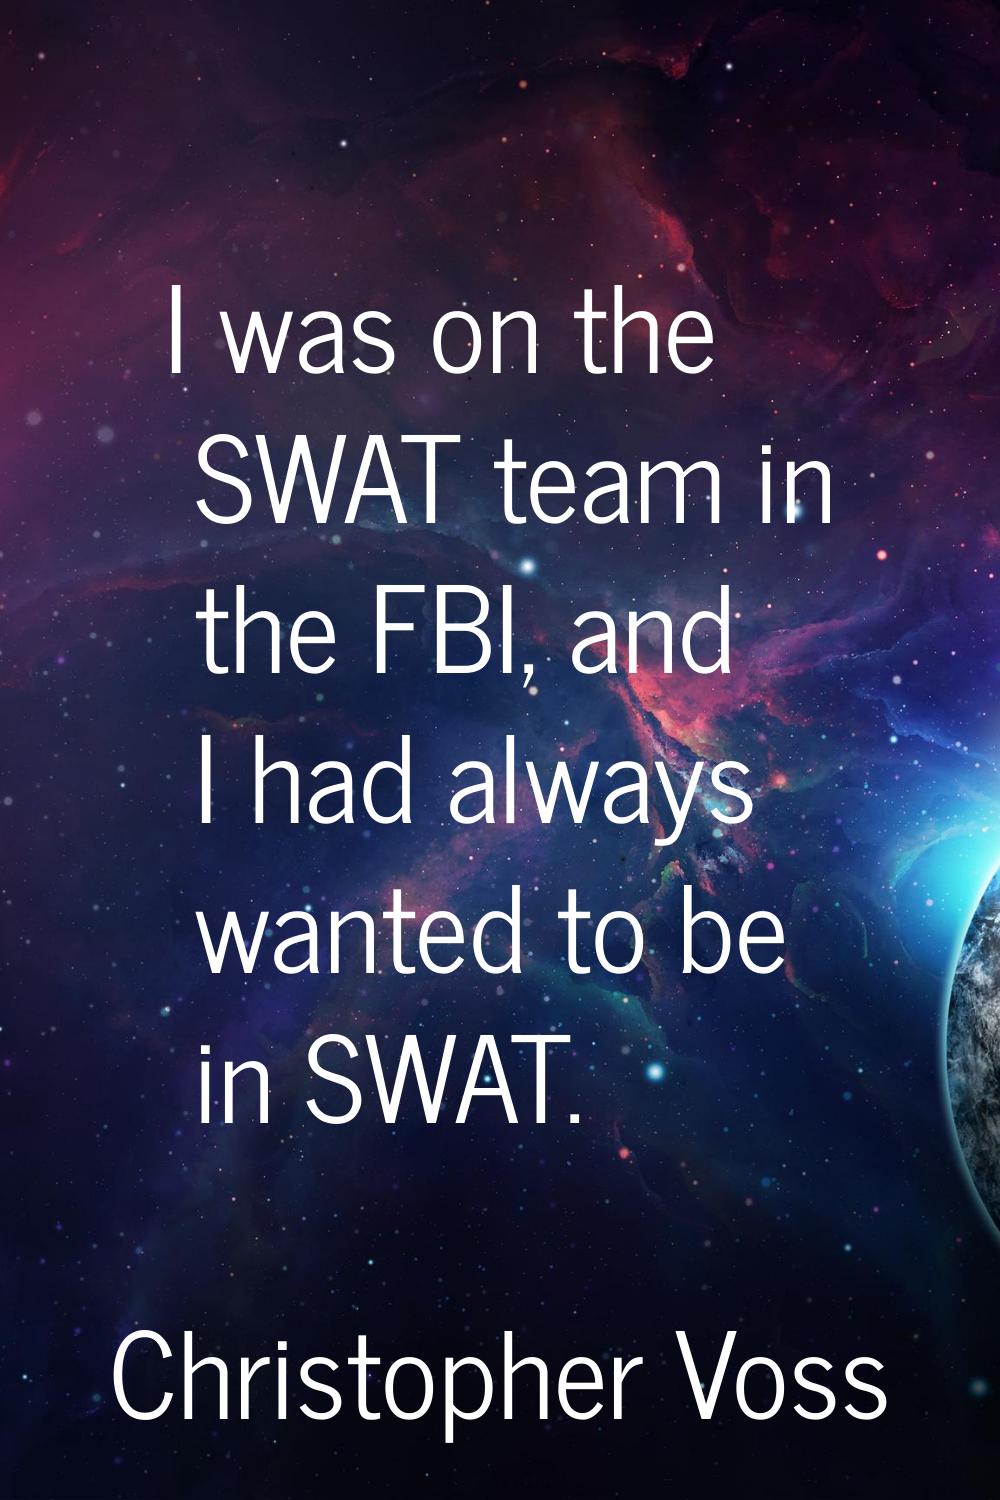 I was on the SWAT team in the FBI, and I had always wanted to be in SWAT.